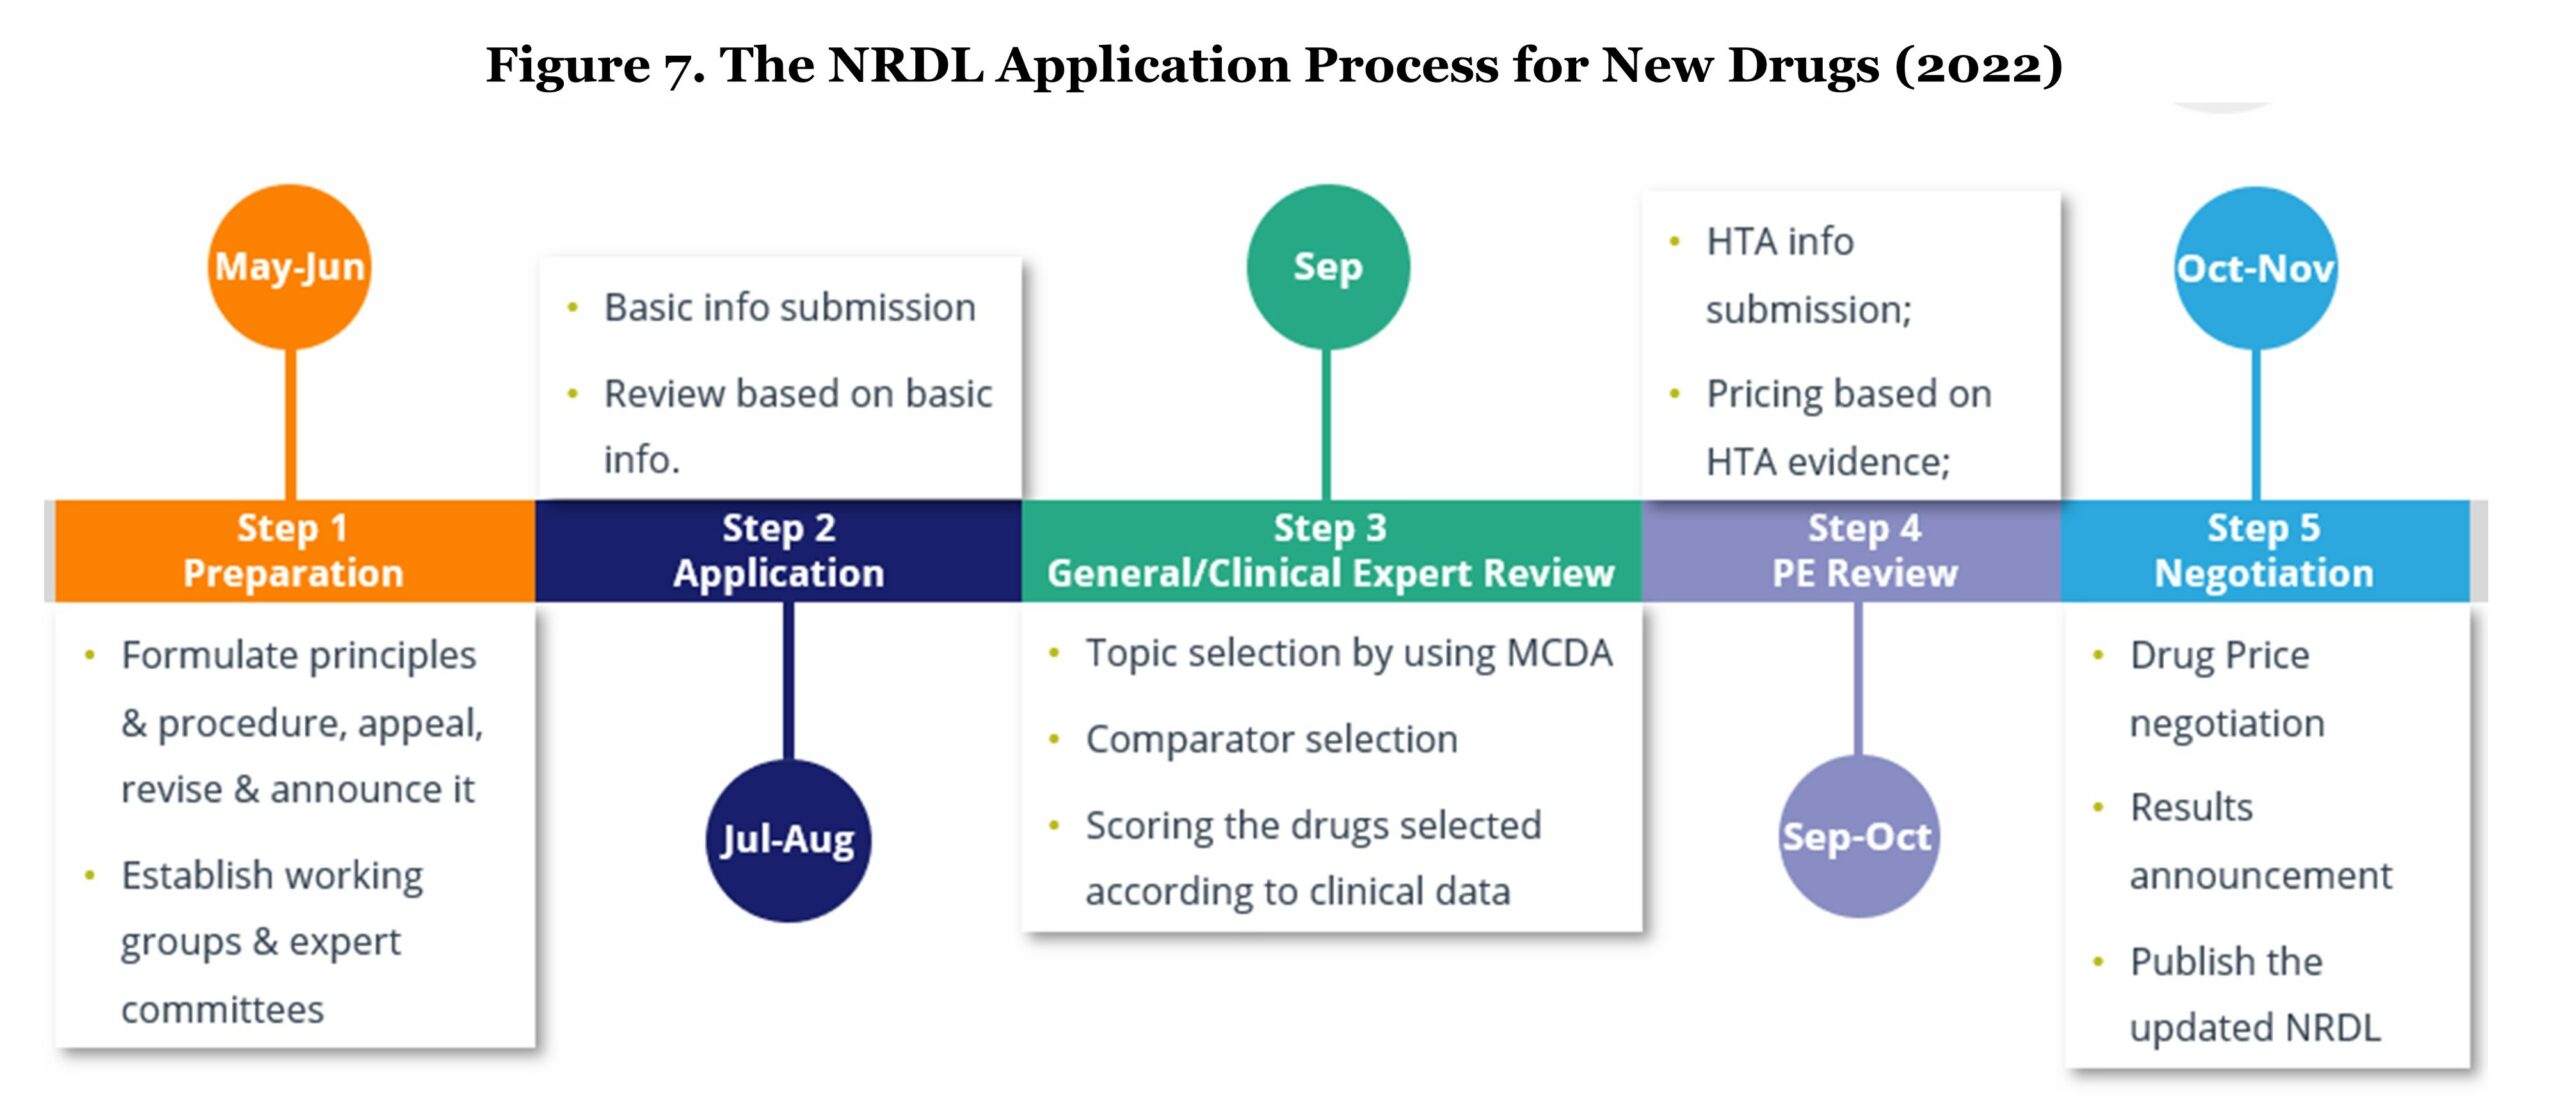 Figure 7. The NRDL Application Process for New Drugs (2022) lists 5 steps including Step 1: Preparation; Step 2: Application; Step 3: General/Clinical Expert Review; Step 4: PE Review; and Step 5 Negotiation.